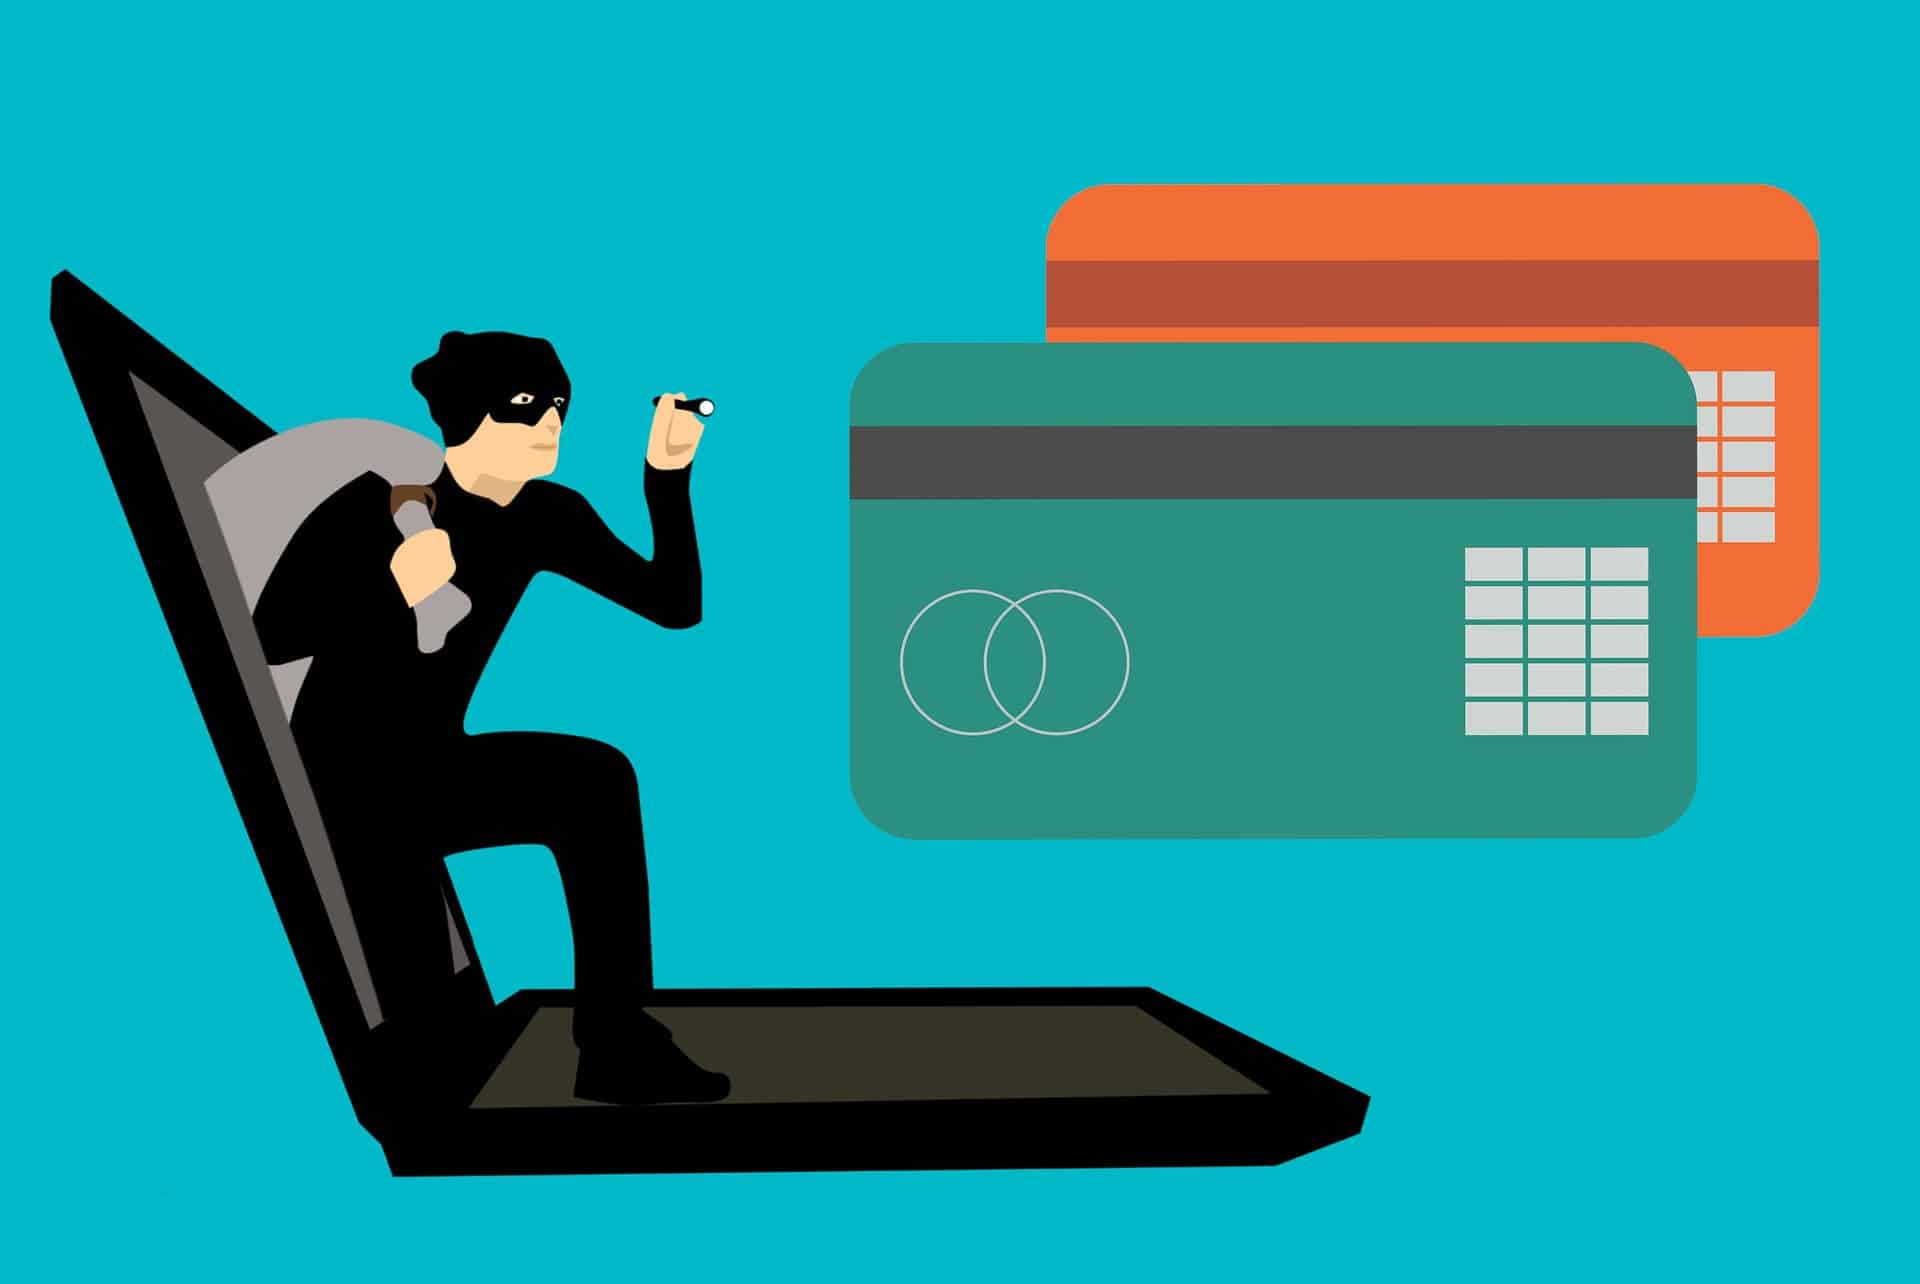 An illustration of hacker scams through fake credit cards